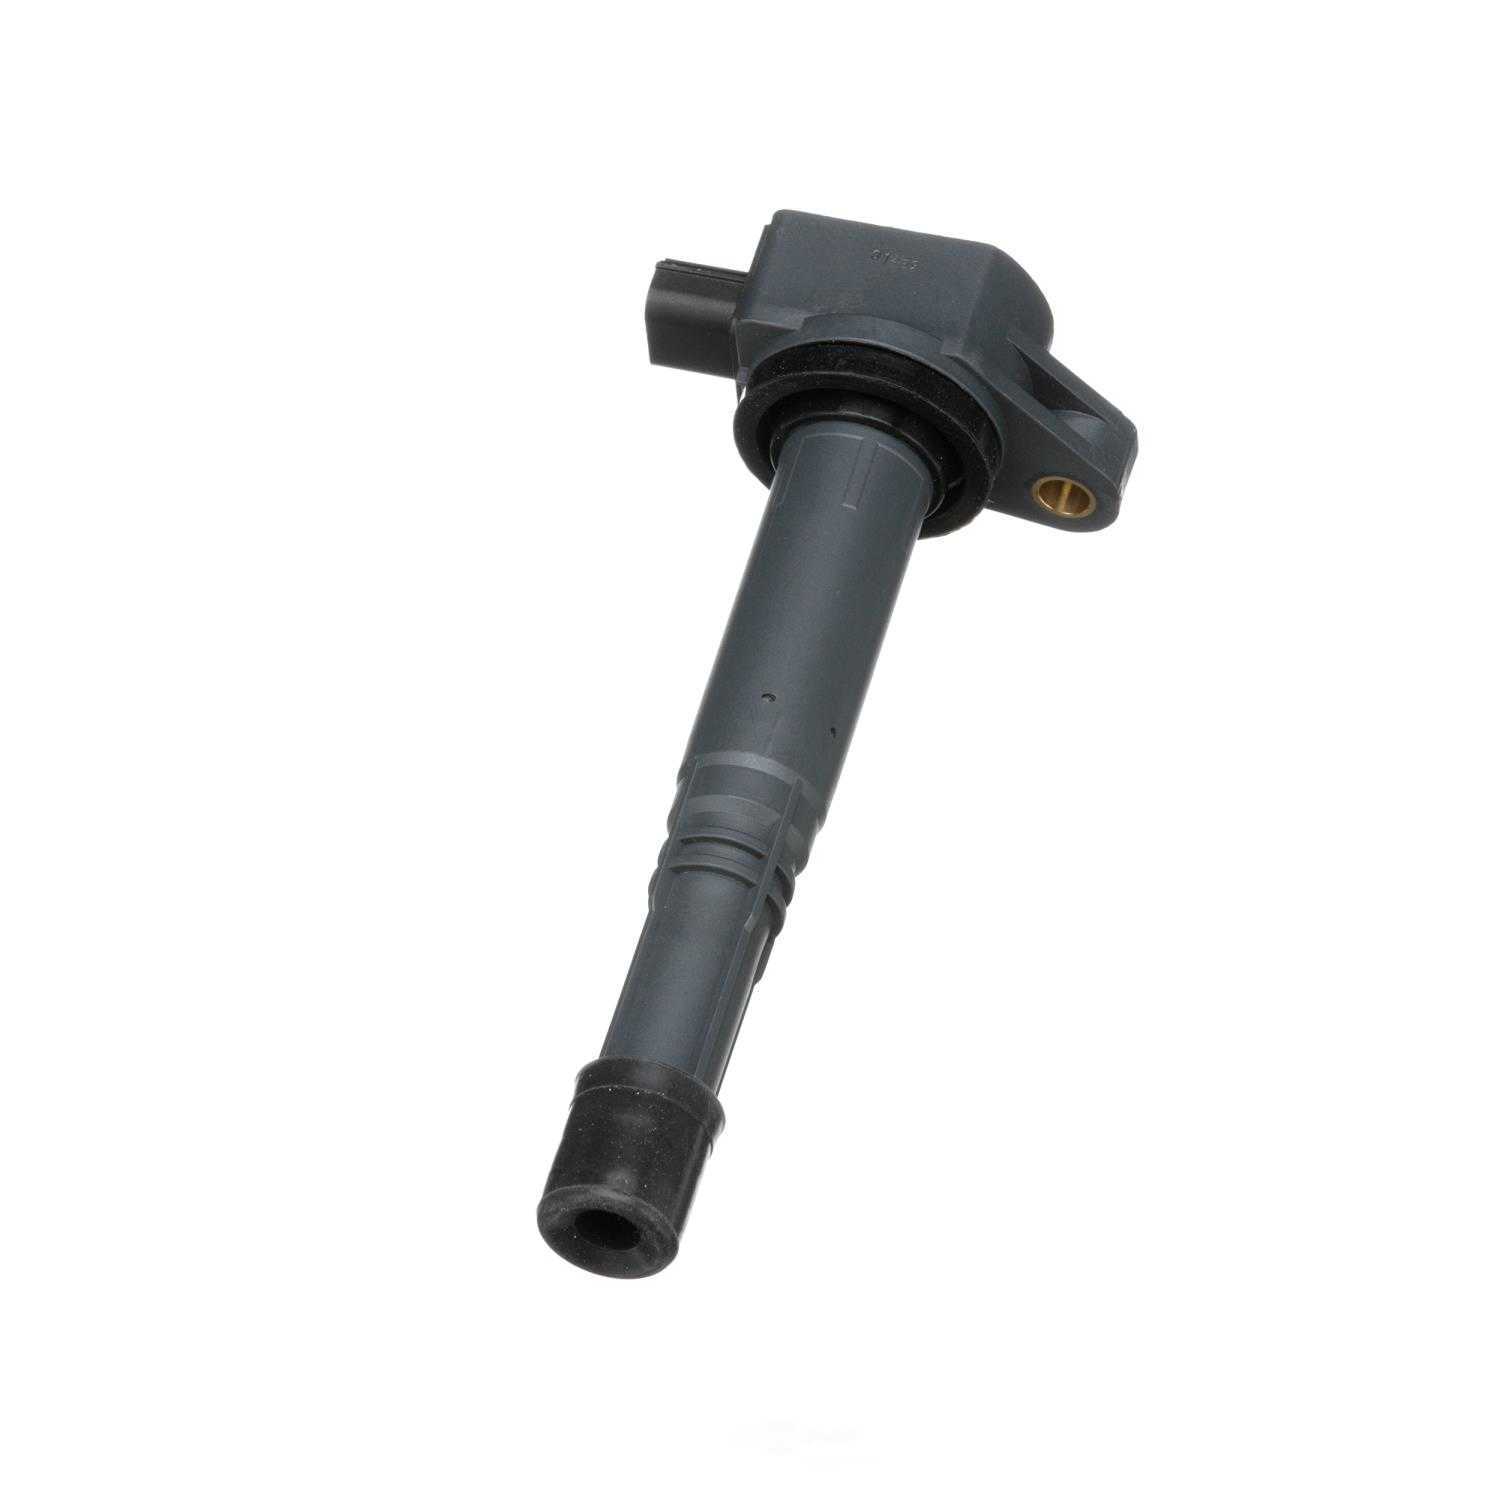 STANDARD MOTOR PRODUCTS - Ignition Coil - STA UF-602